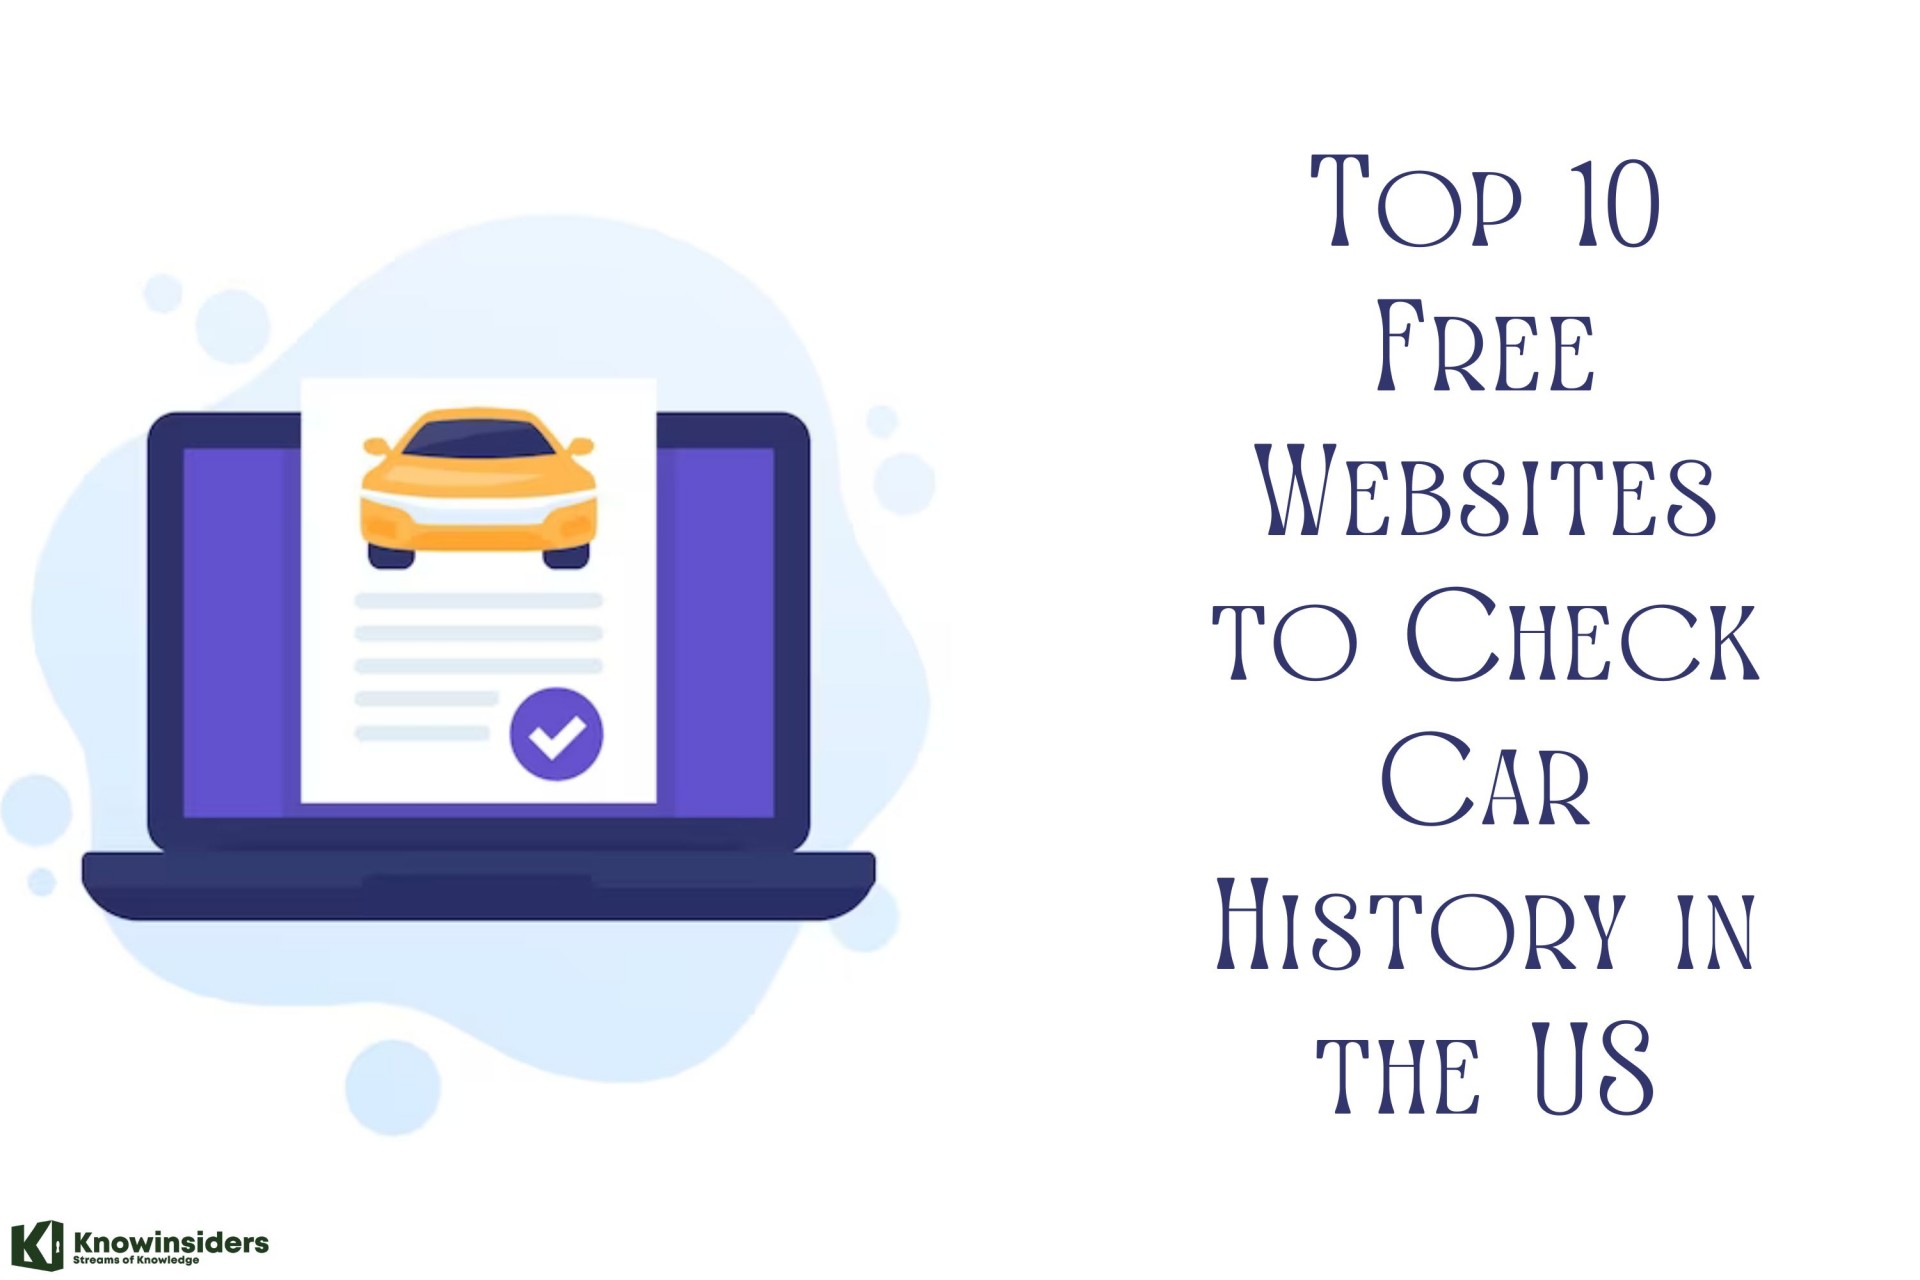 How to Check A Car History in the U.S - Top 10 Free Sites to Find